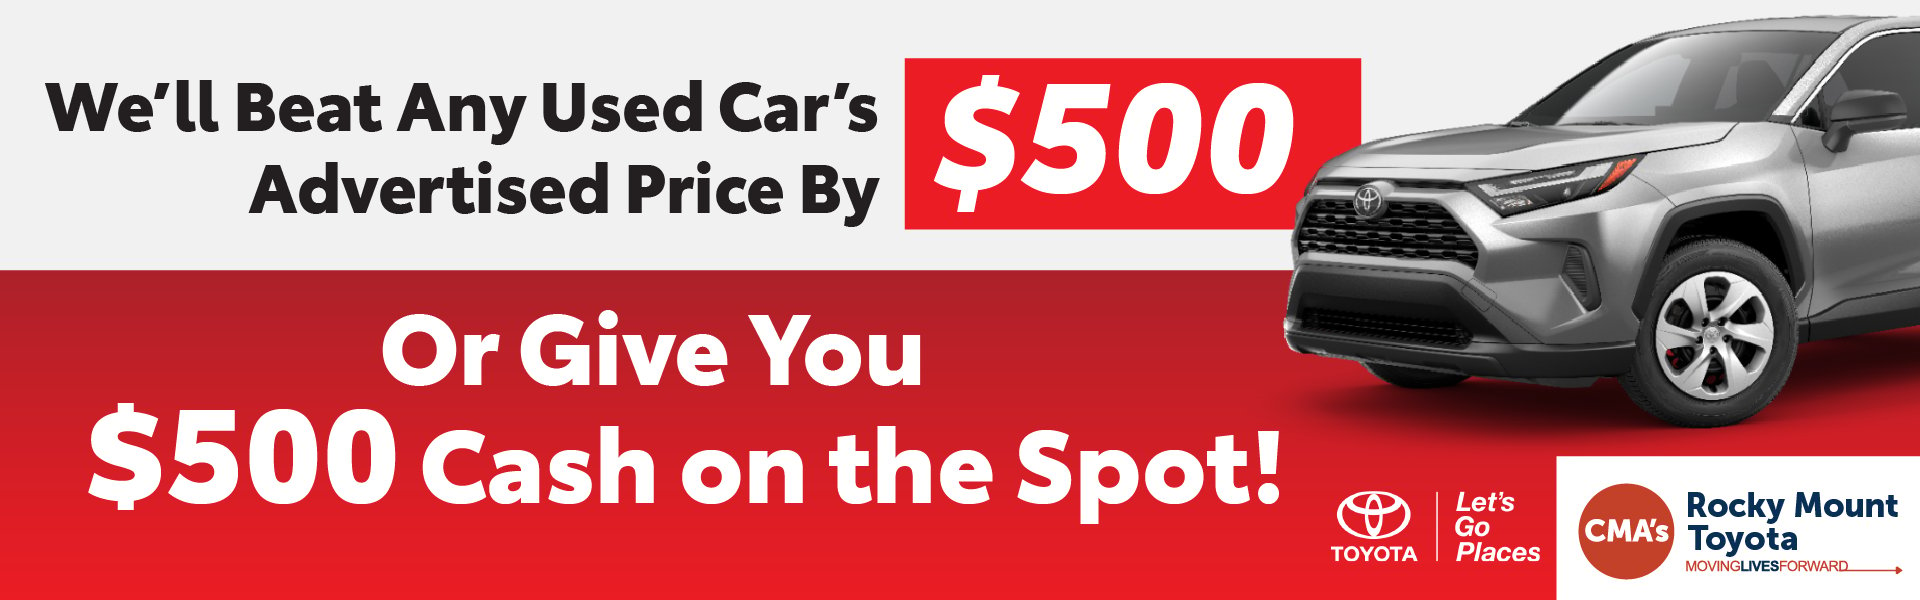 Beat Any Used Car Advertised Price